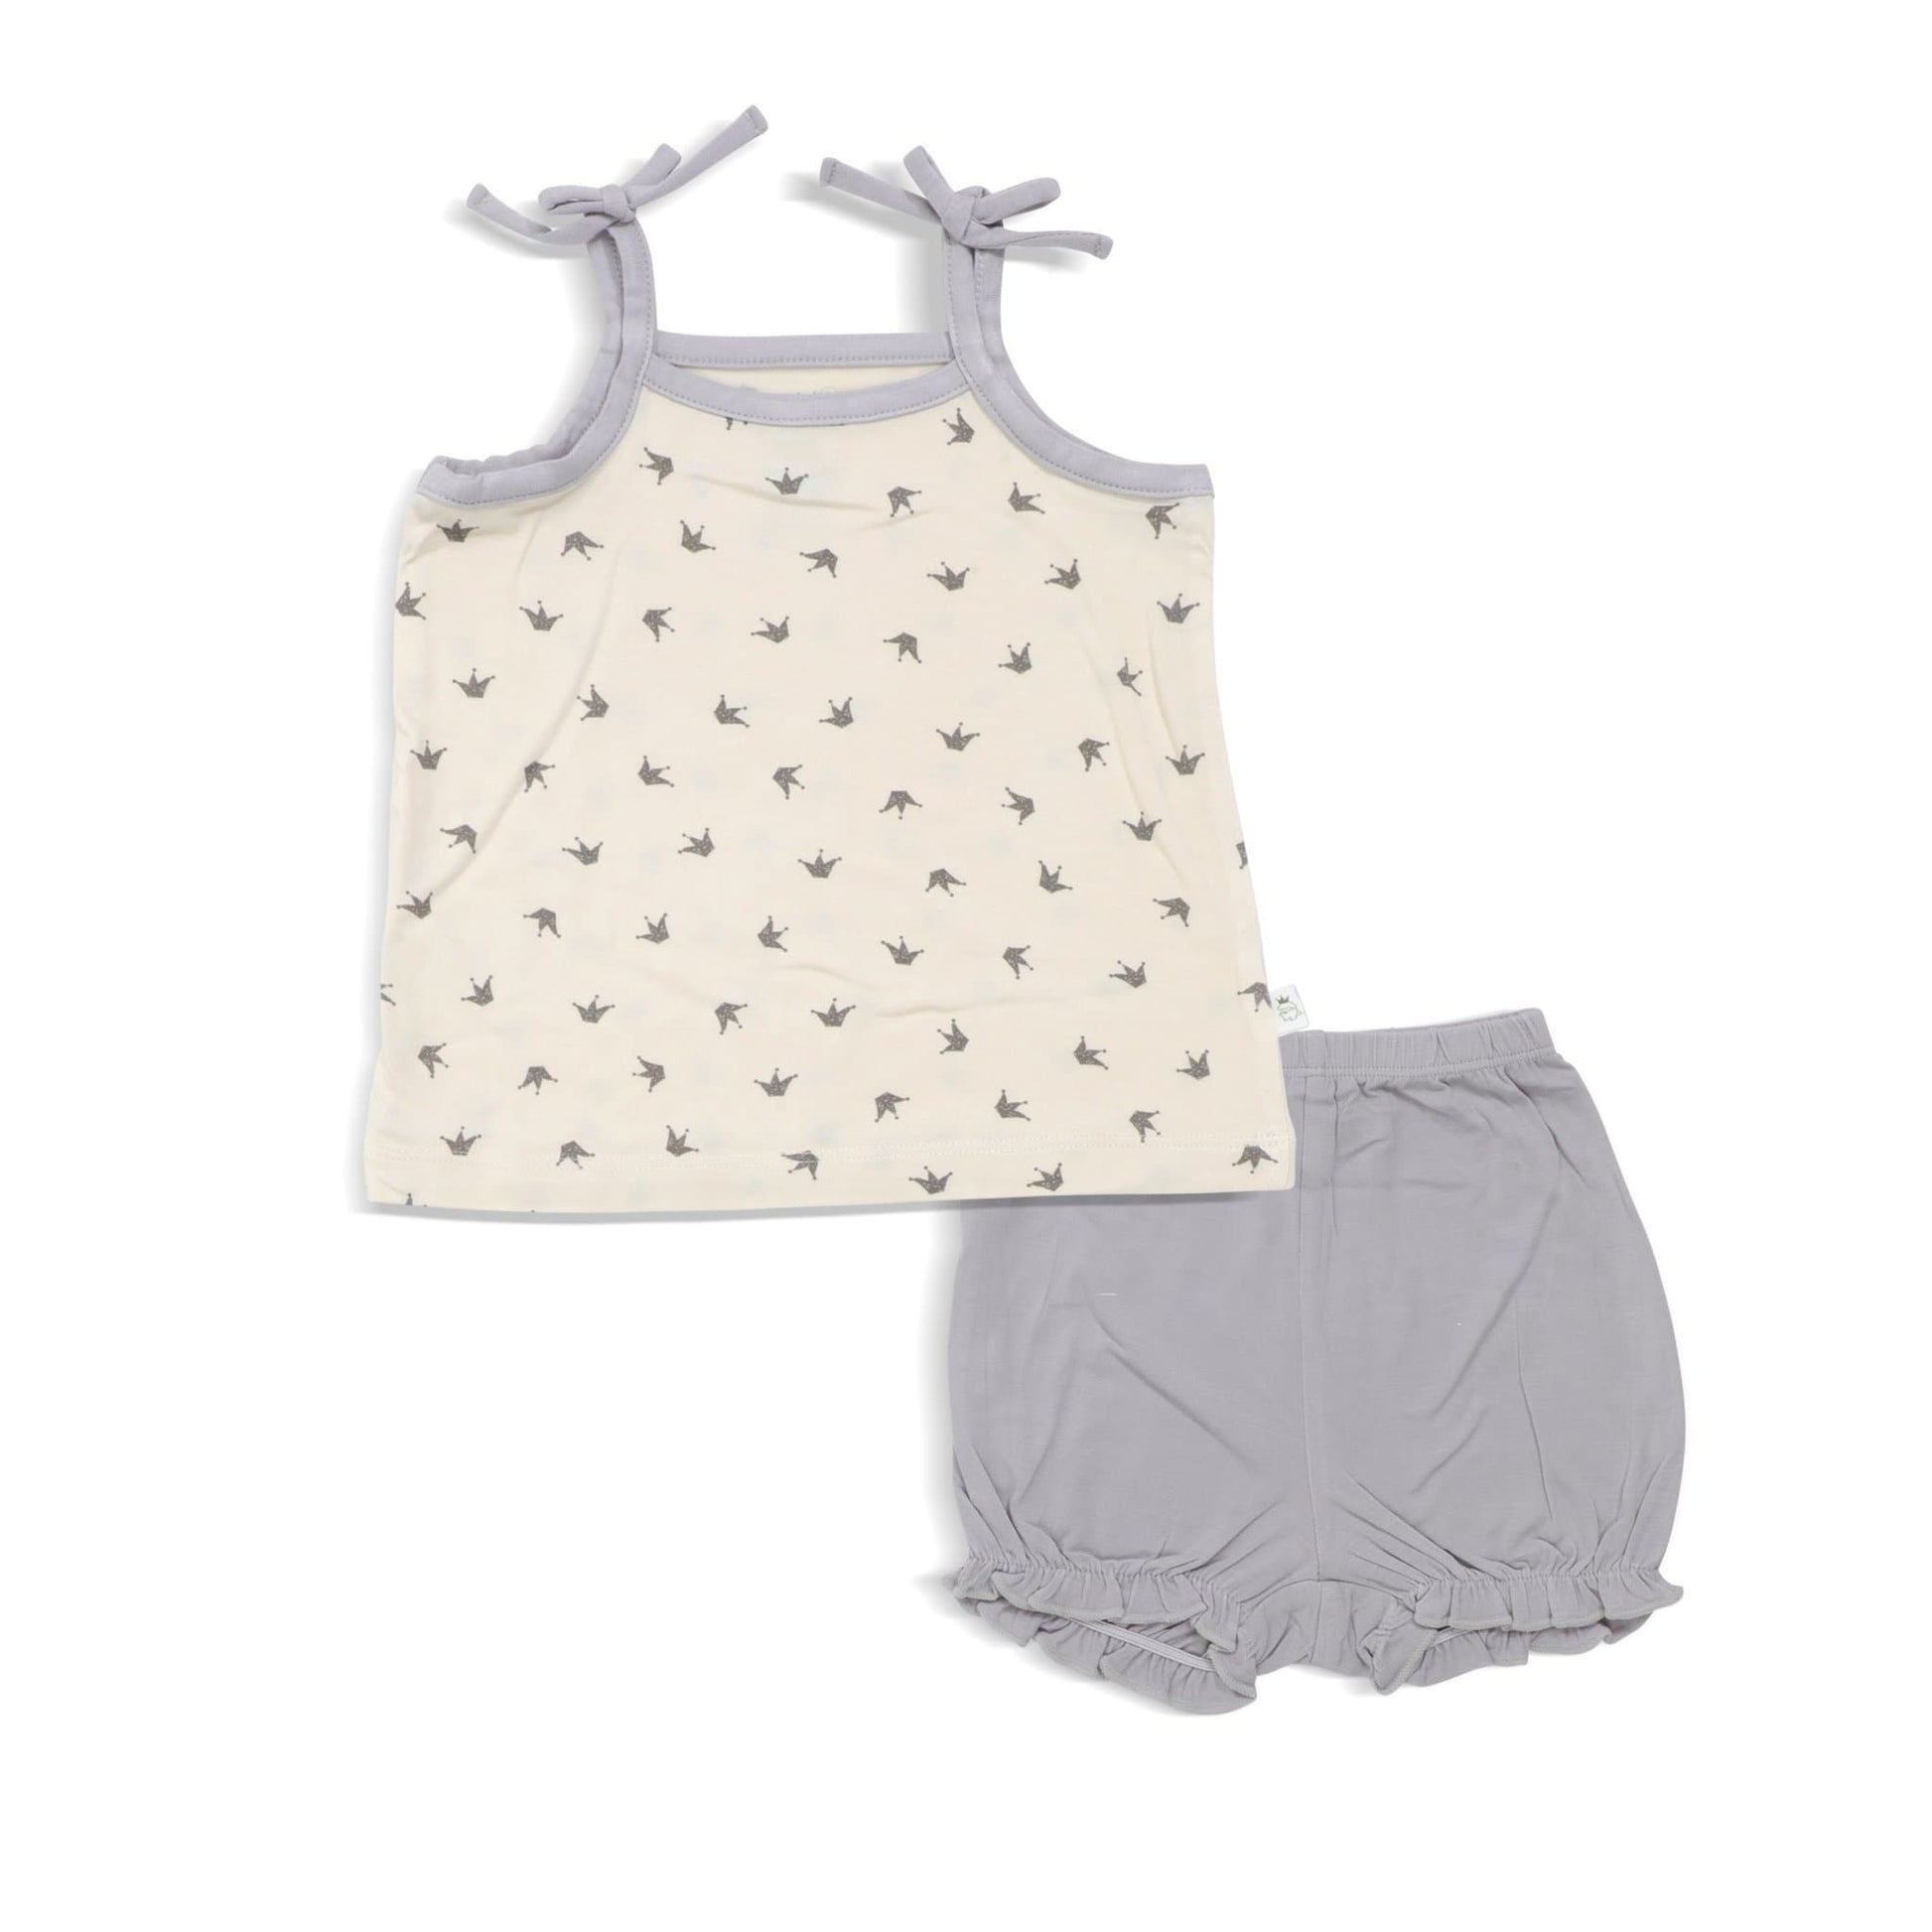 Royale - Blouse with Spaghetti Tie & Bloomer Shorts (2-pc Set) by simplylifebaby